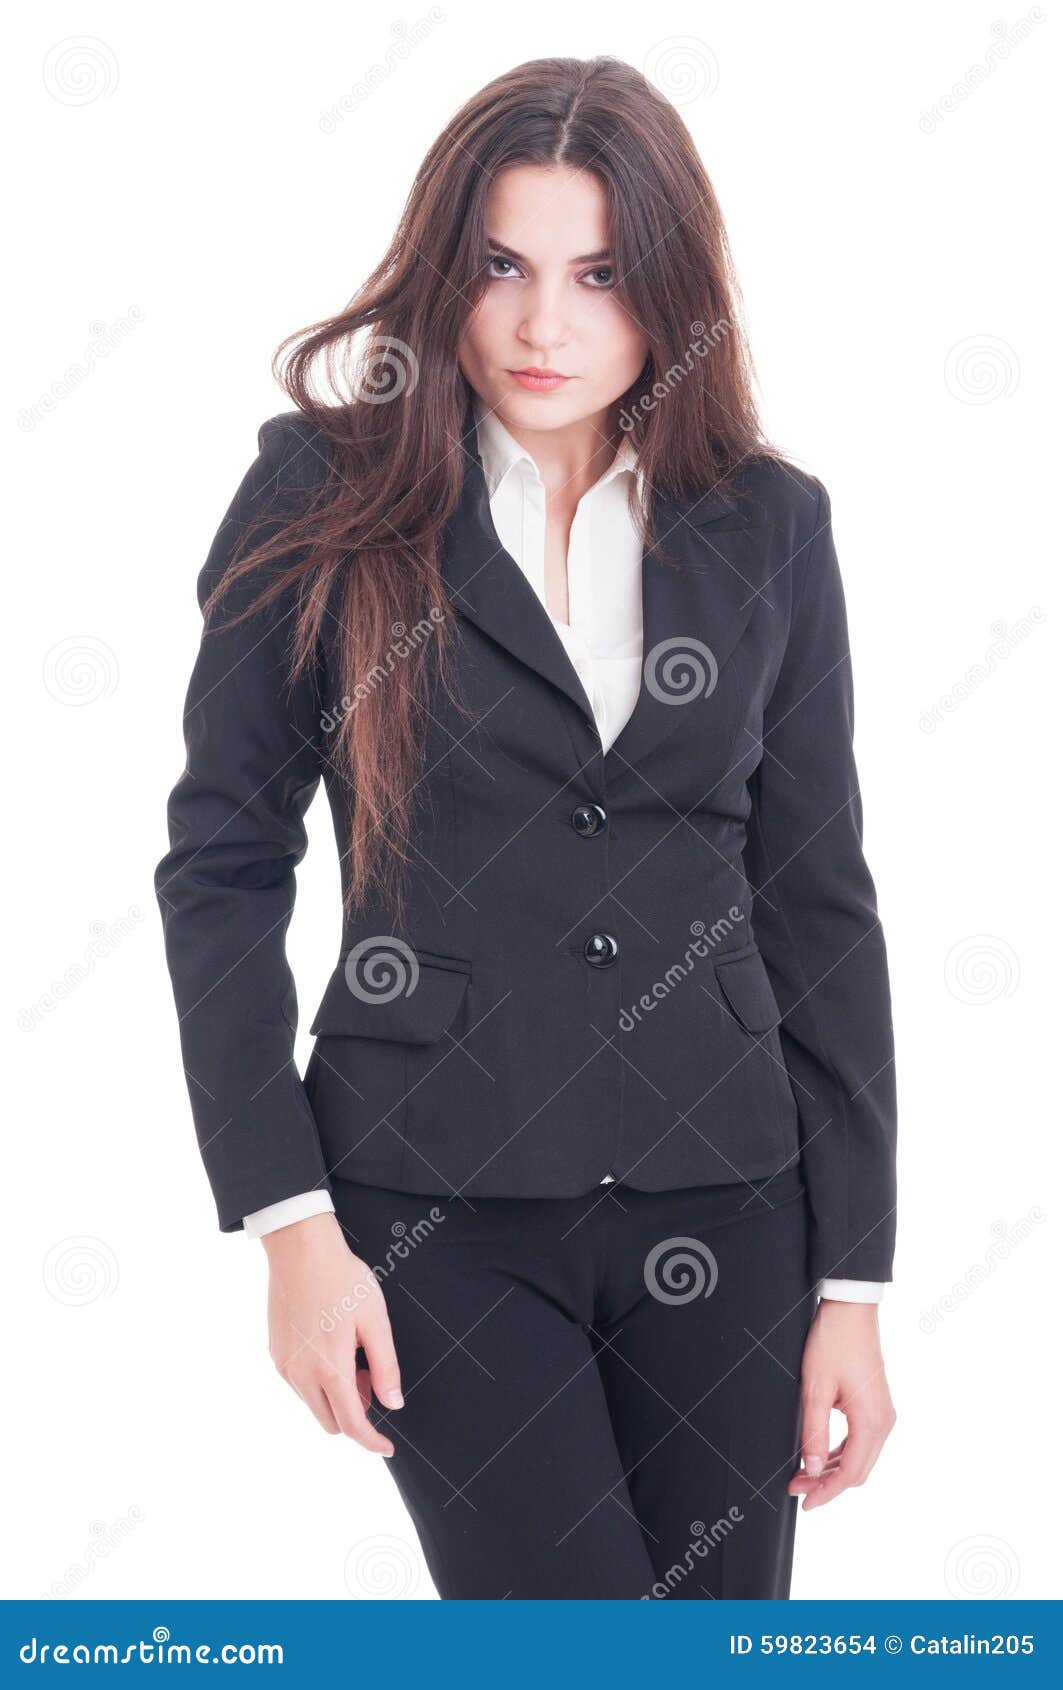 Young Business Woman with Long Hair Stock Photo - Image of career ...